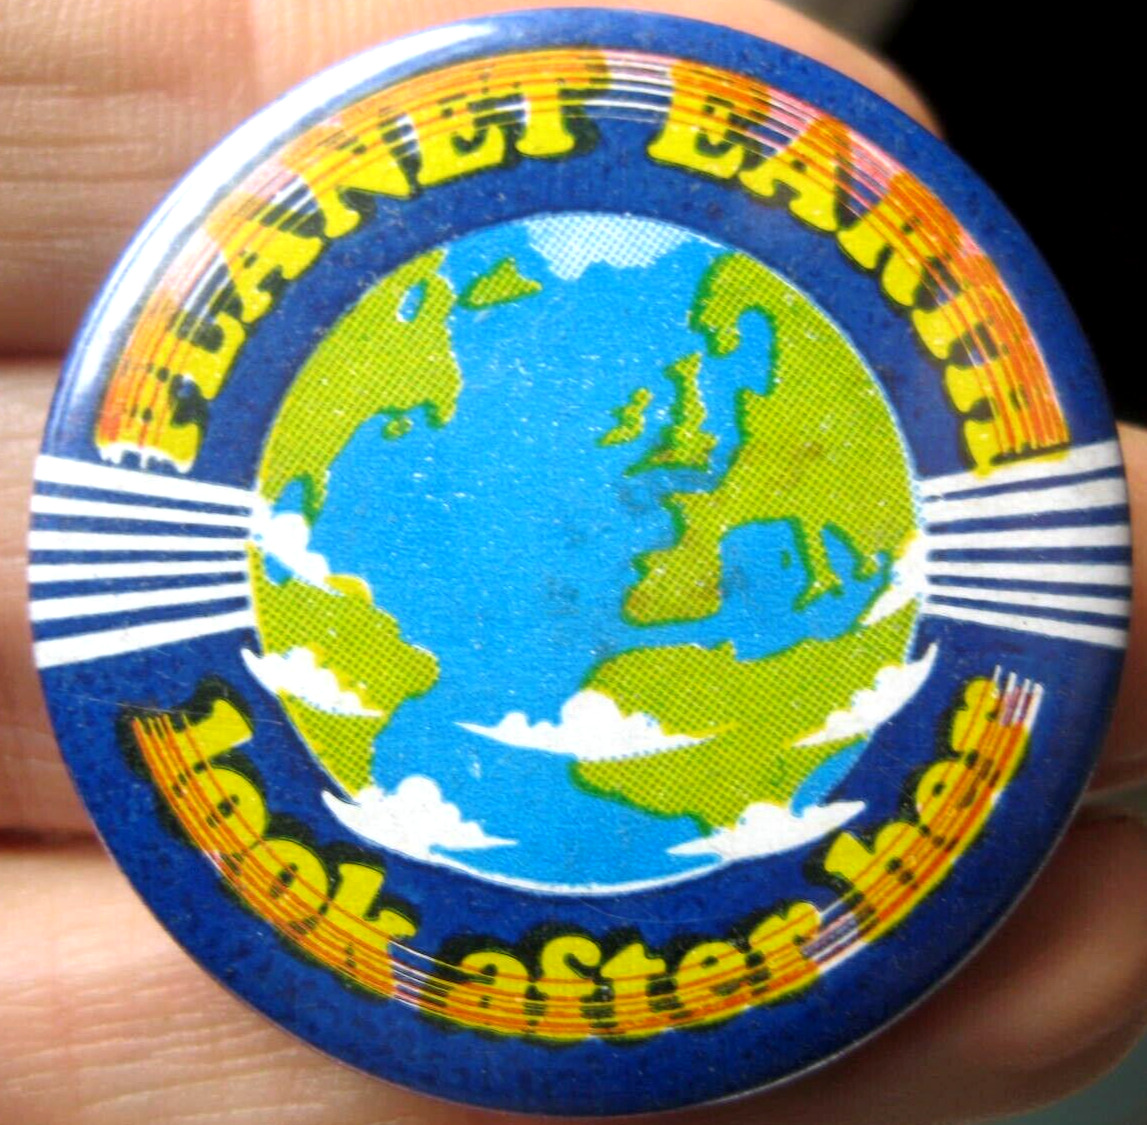 FRIENDS OF THE EARTH vintage 1970s EARTH LOOK AFTER HER campaign 38mm pin BADGE